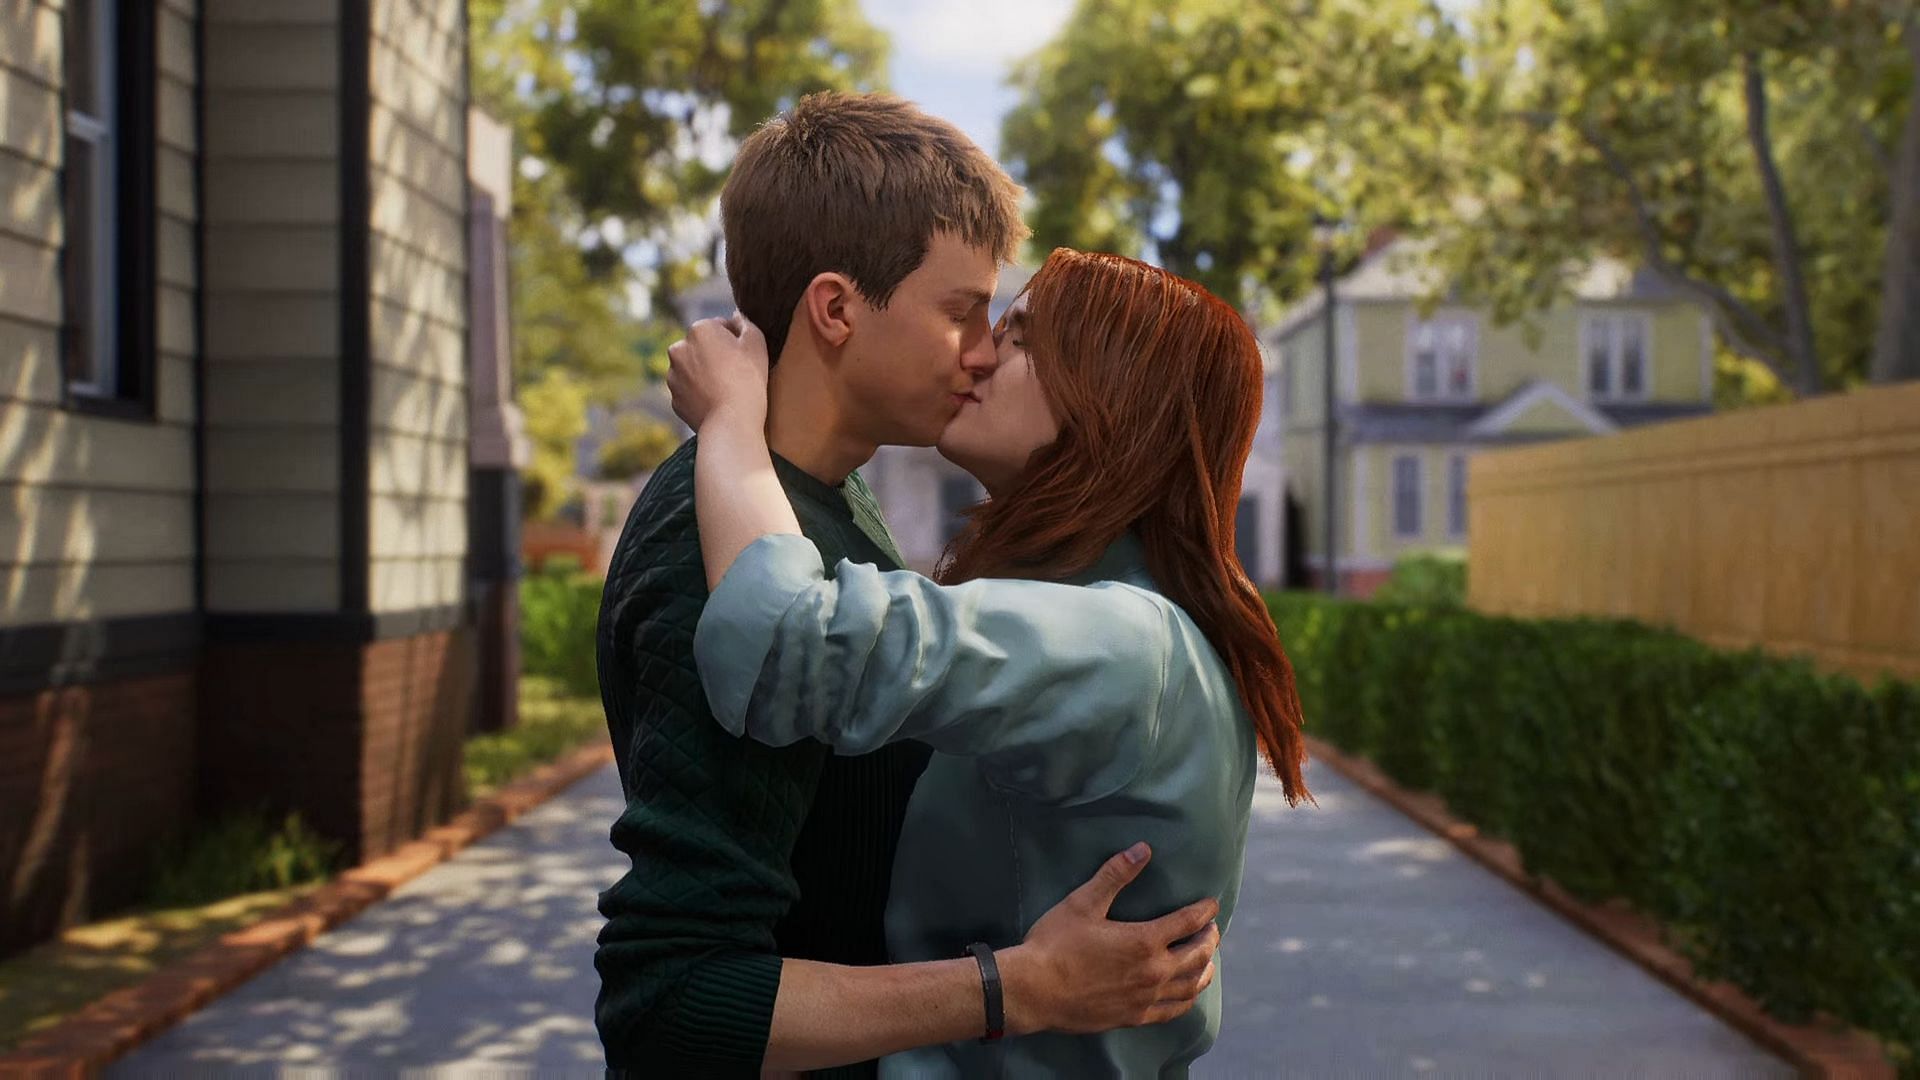 Marvel's Spider-Man 2 Ending Explained: Will There Be Another Game?